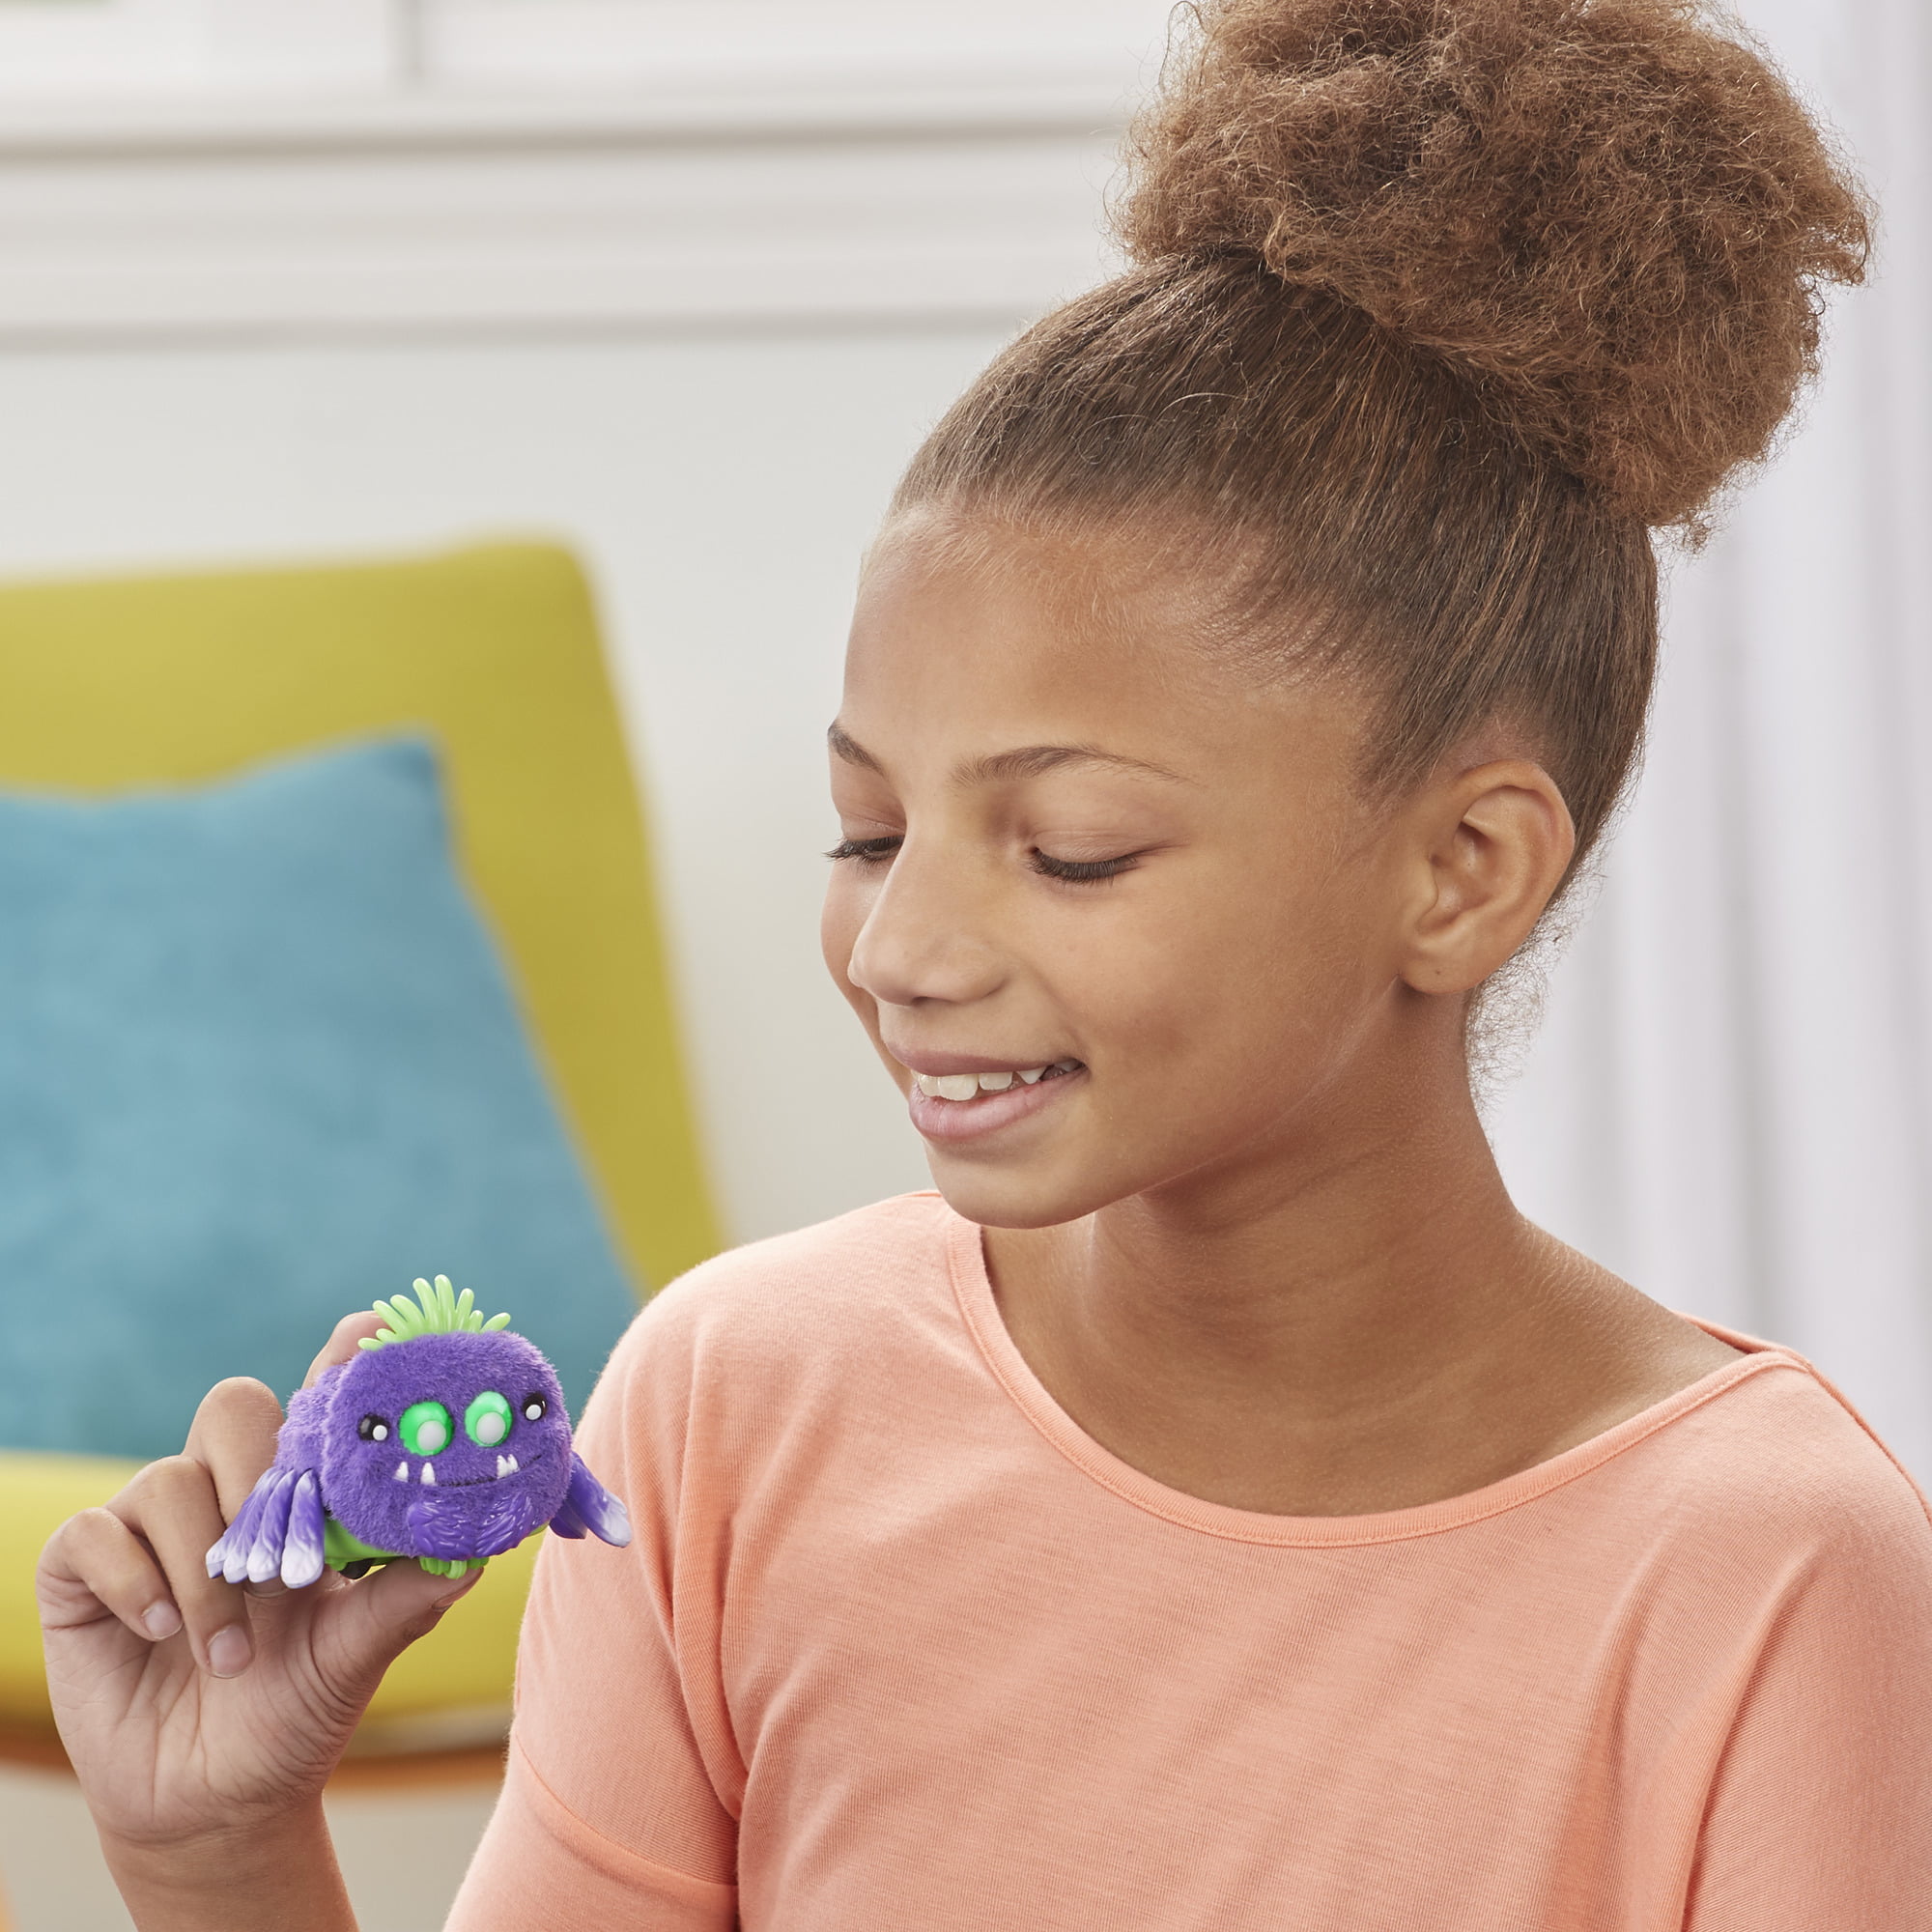 Hasbro Yellies Wiggly Wriggles Voice-activated Spider Pet Ages 5 and up for sale online